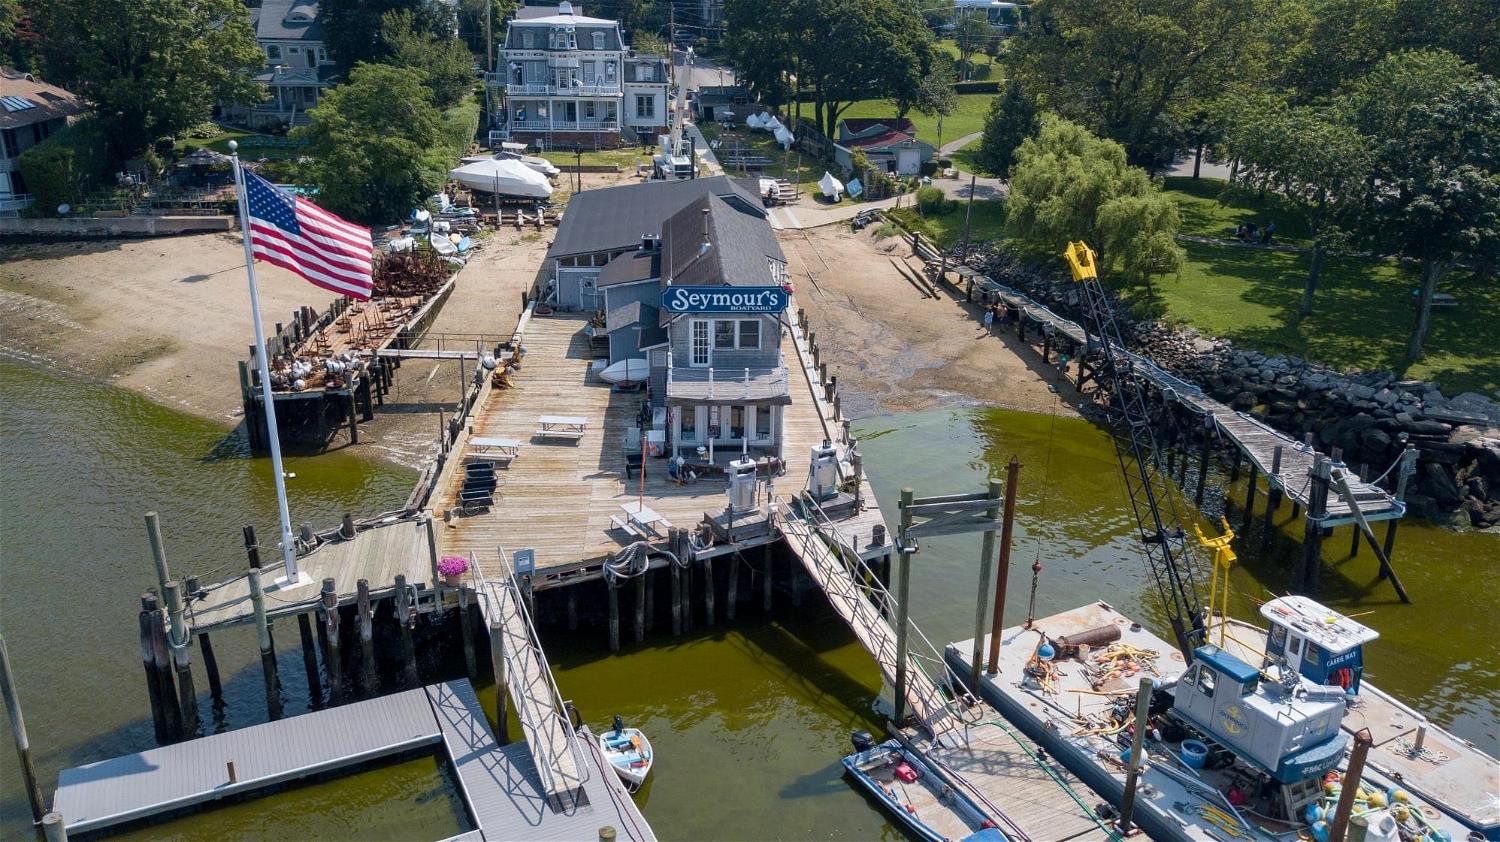 Seymour&#39;s Boatyard in Northport Village on July 17, showing algal bloom after heavy rainfall. Photo courtesy of Rebecca Grella.